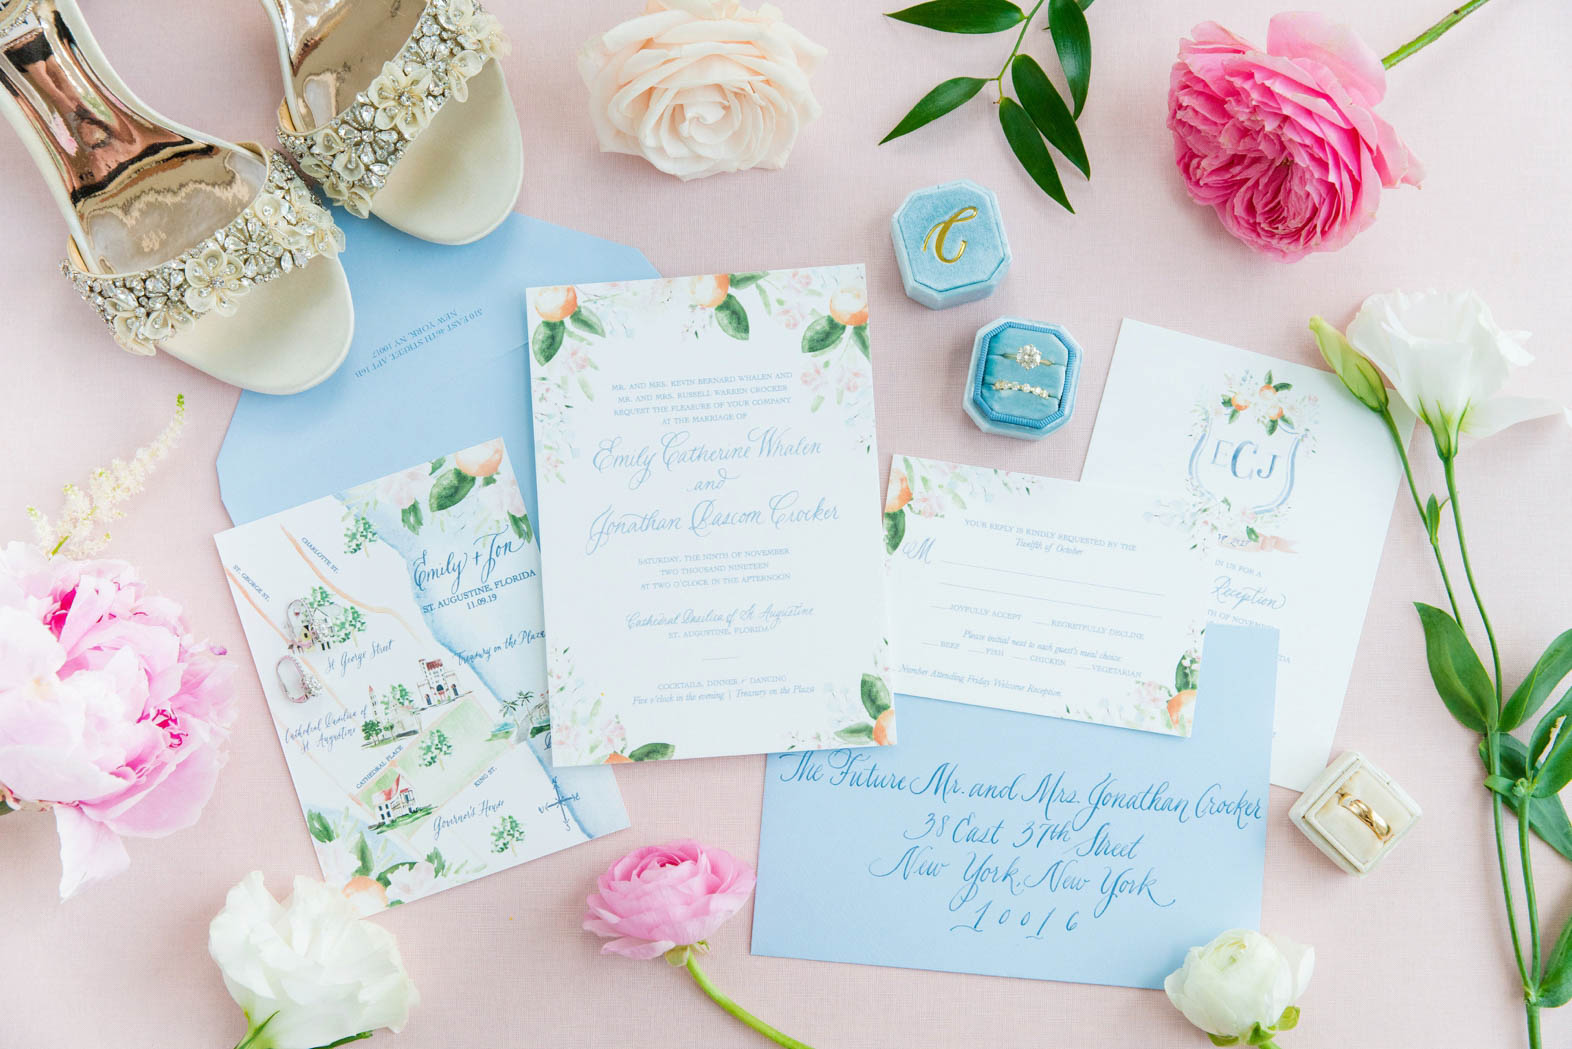 pink and light blue wedding invitation suite styled with flowers, rings + bride's shoes